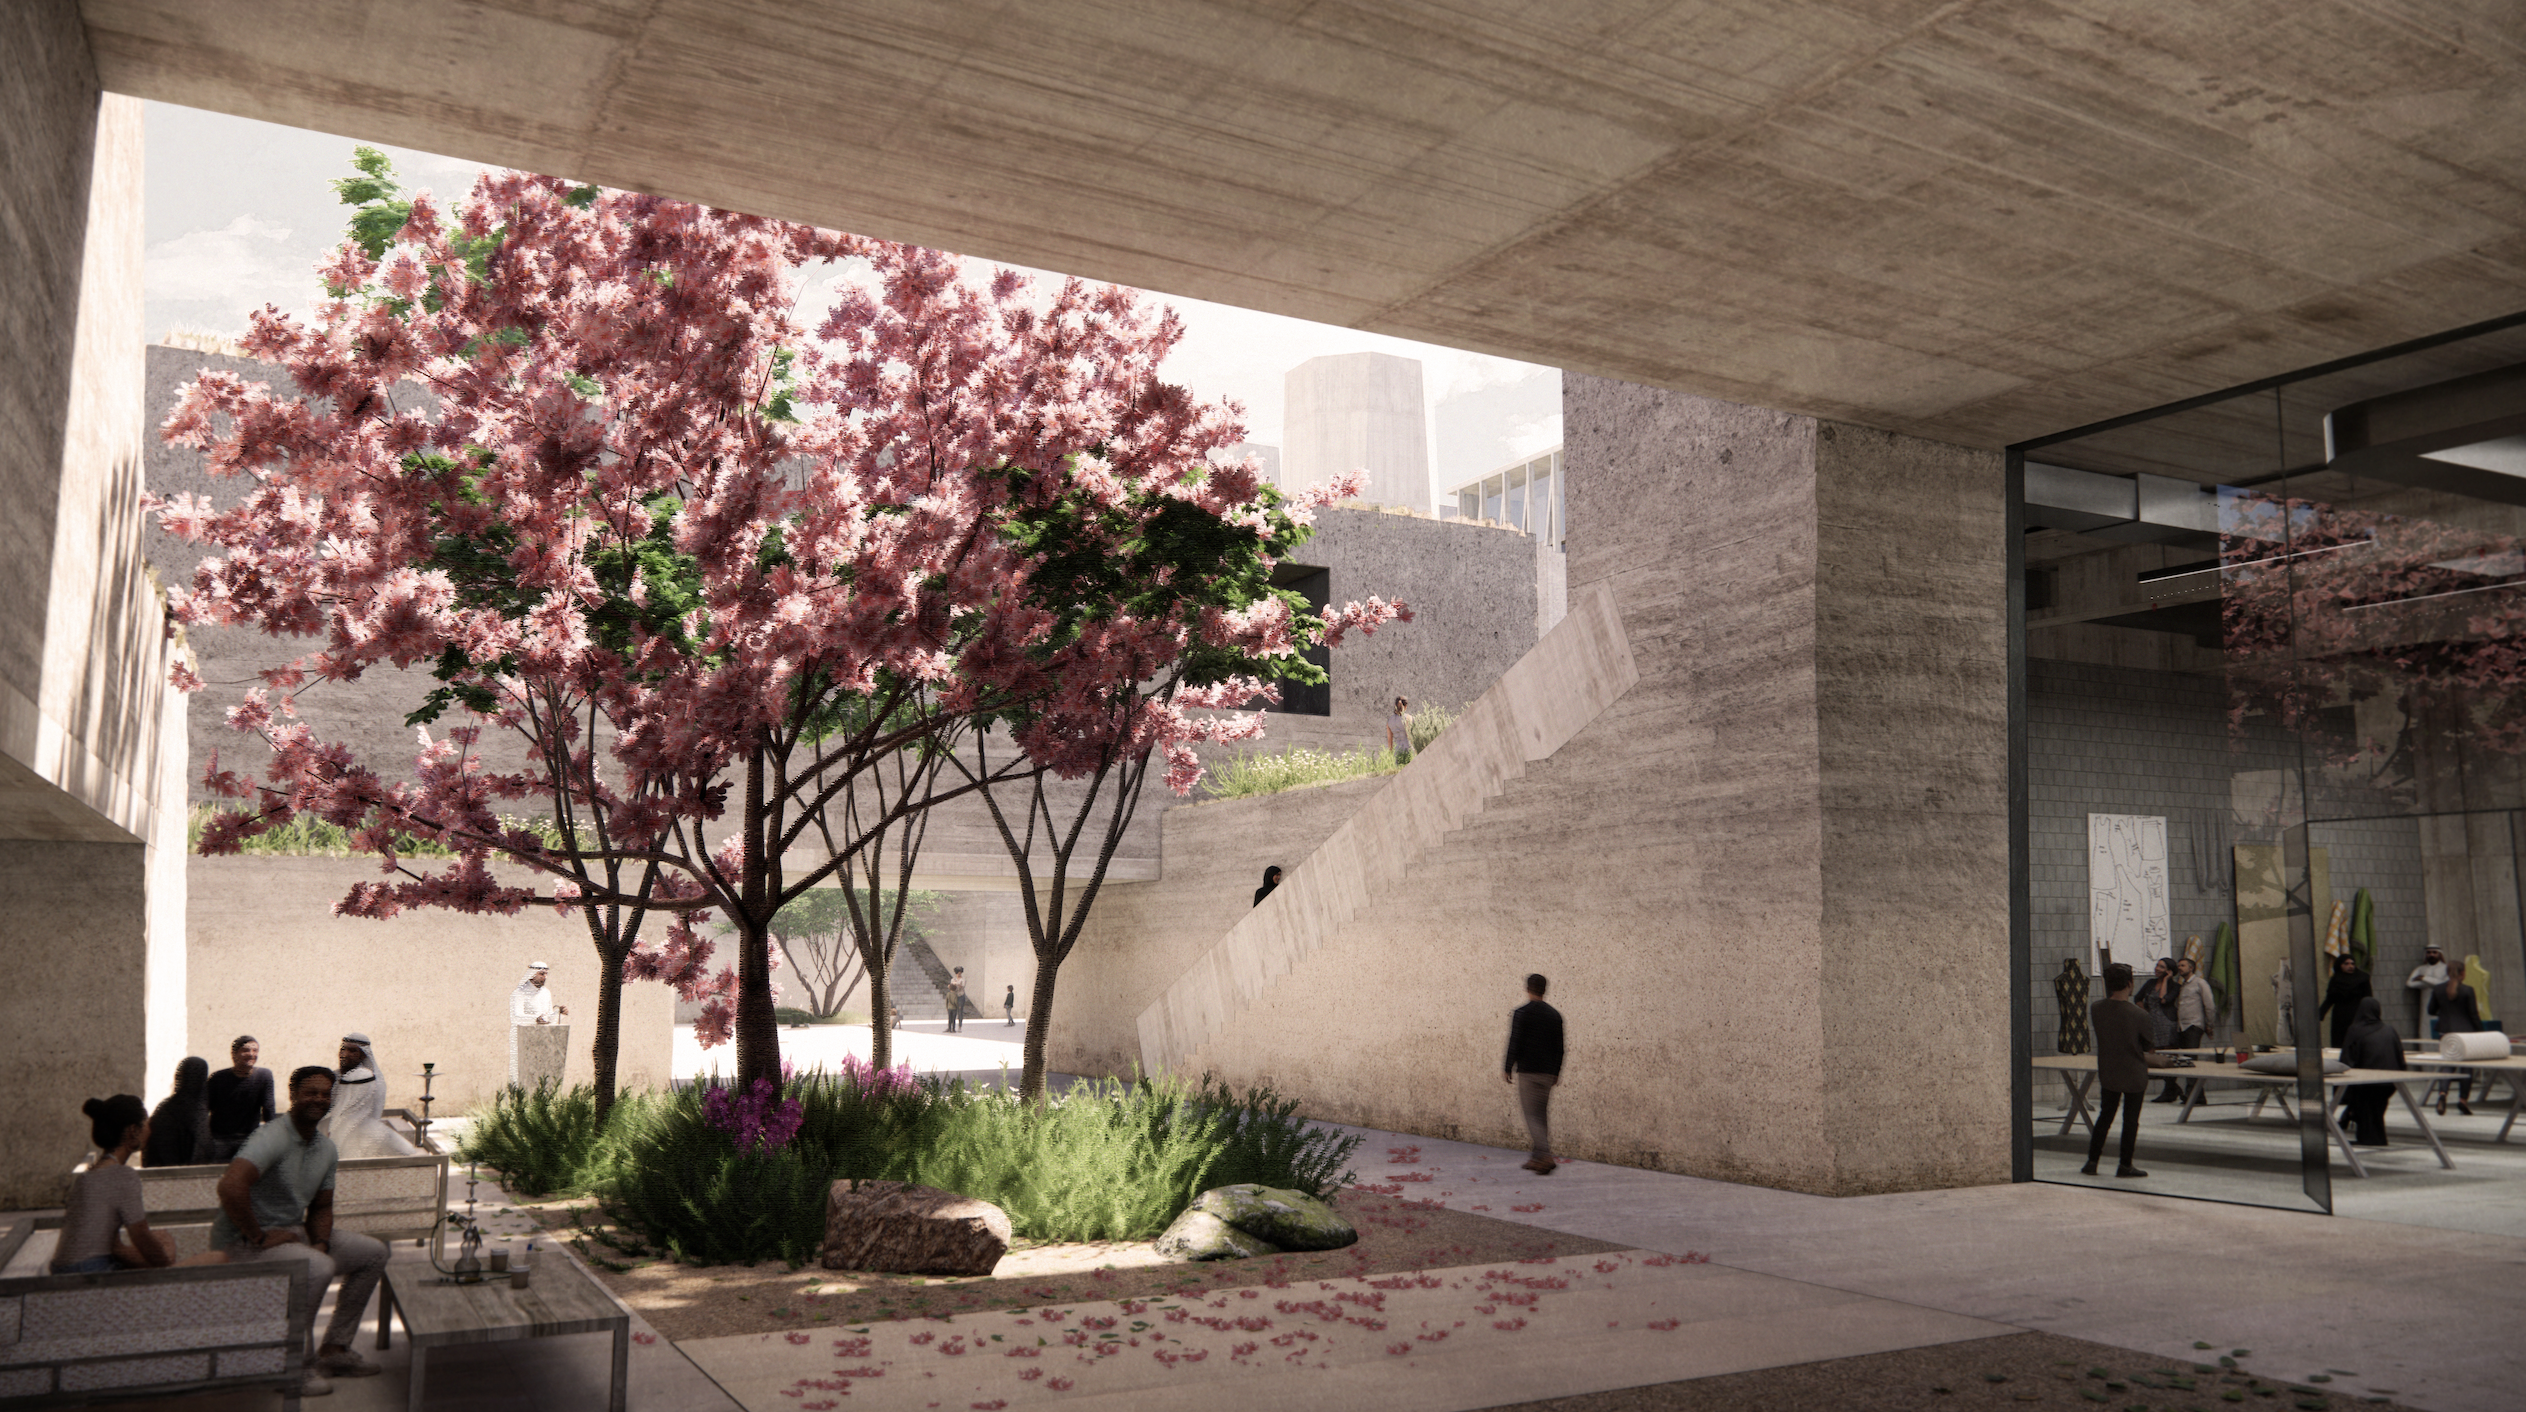 Digital render of the spaces around Qatar's Art Mill Museum, with a flowering cherry blossom tree in the centre.